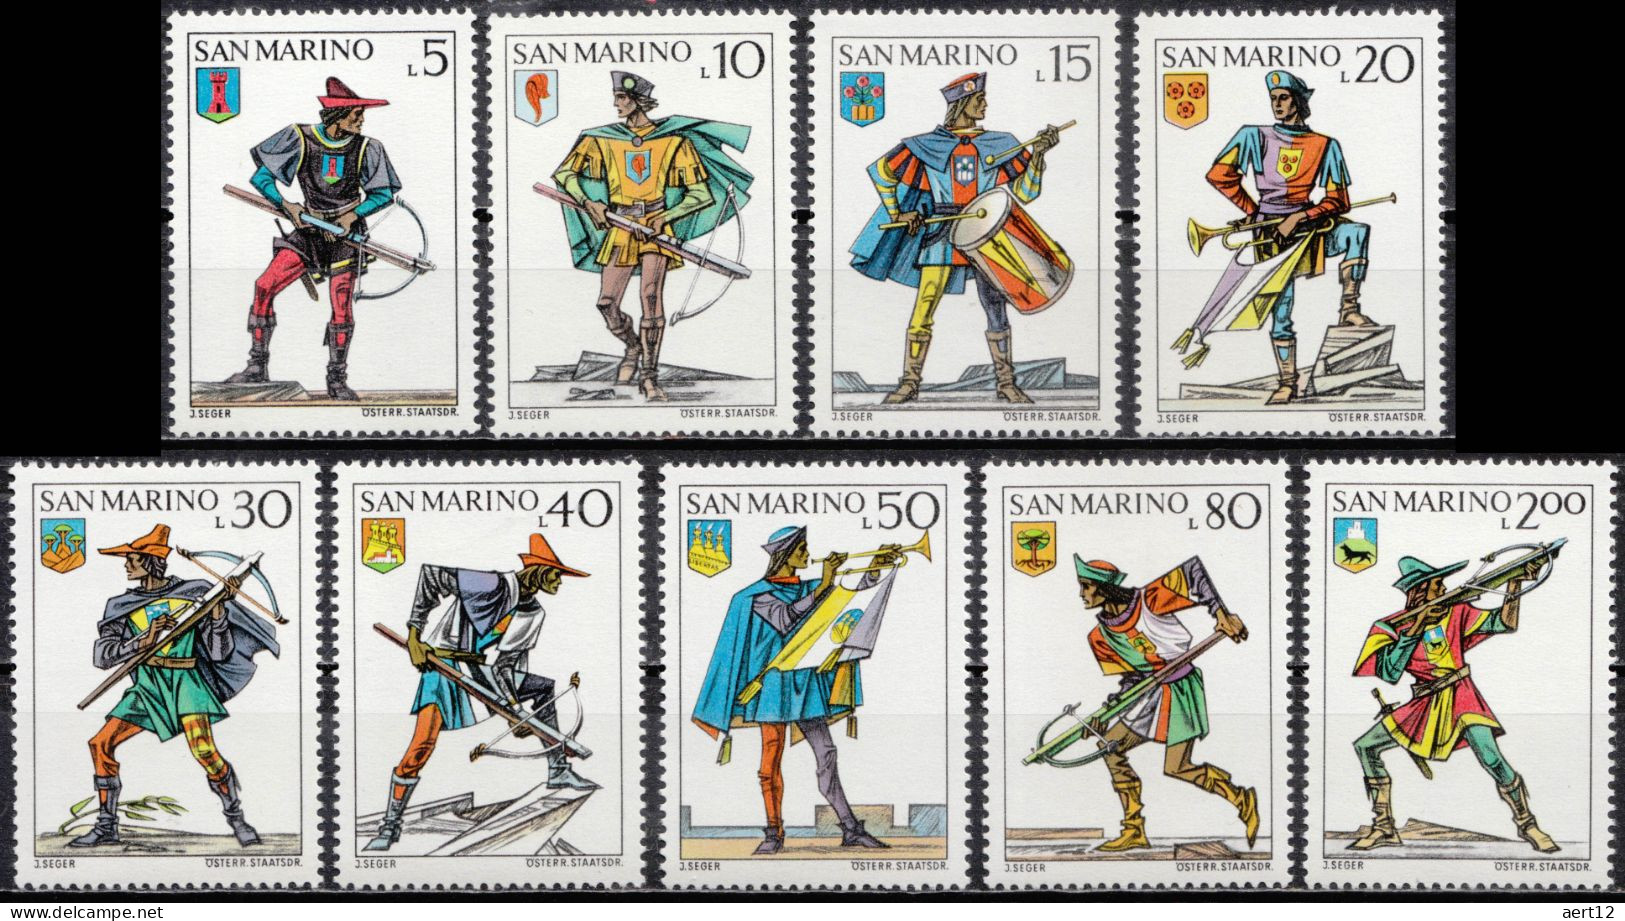 1973, San Marino, Crossbow Tournament, Uniforms, Weapons, 9 Stamps, MNH(**), SM 1046-54 - Unused Stamps